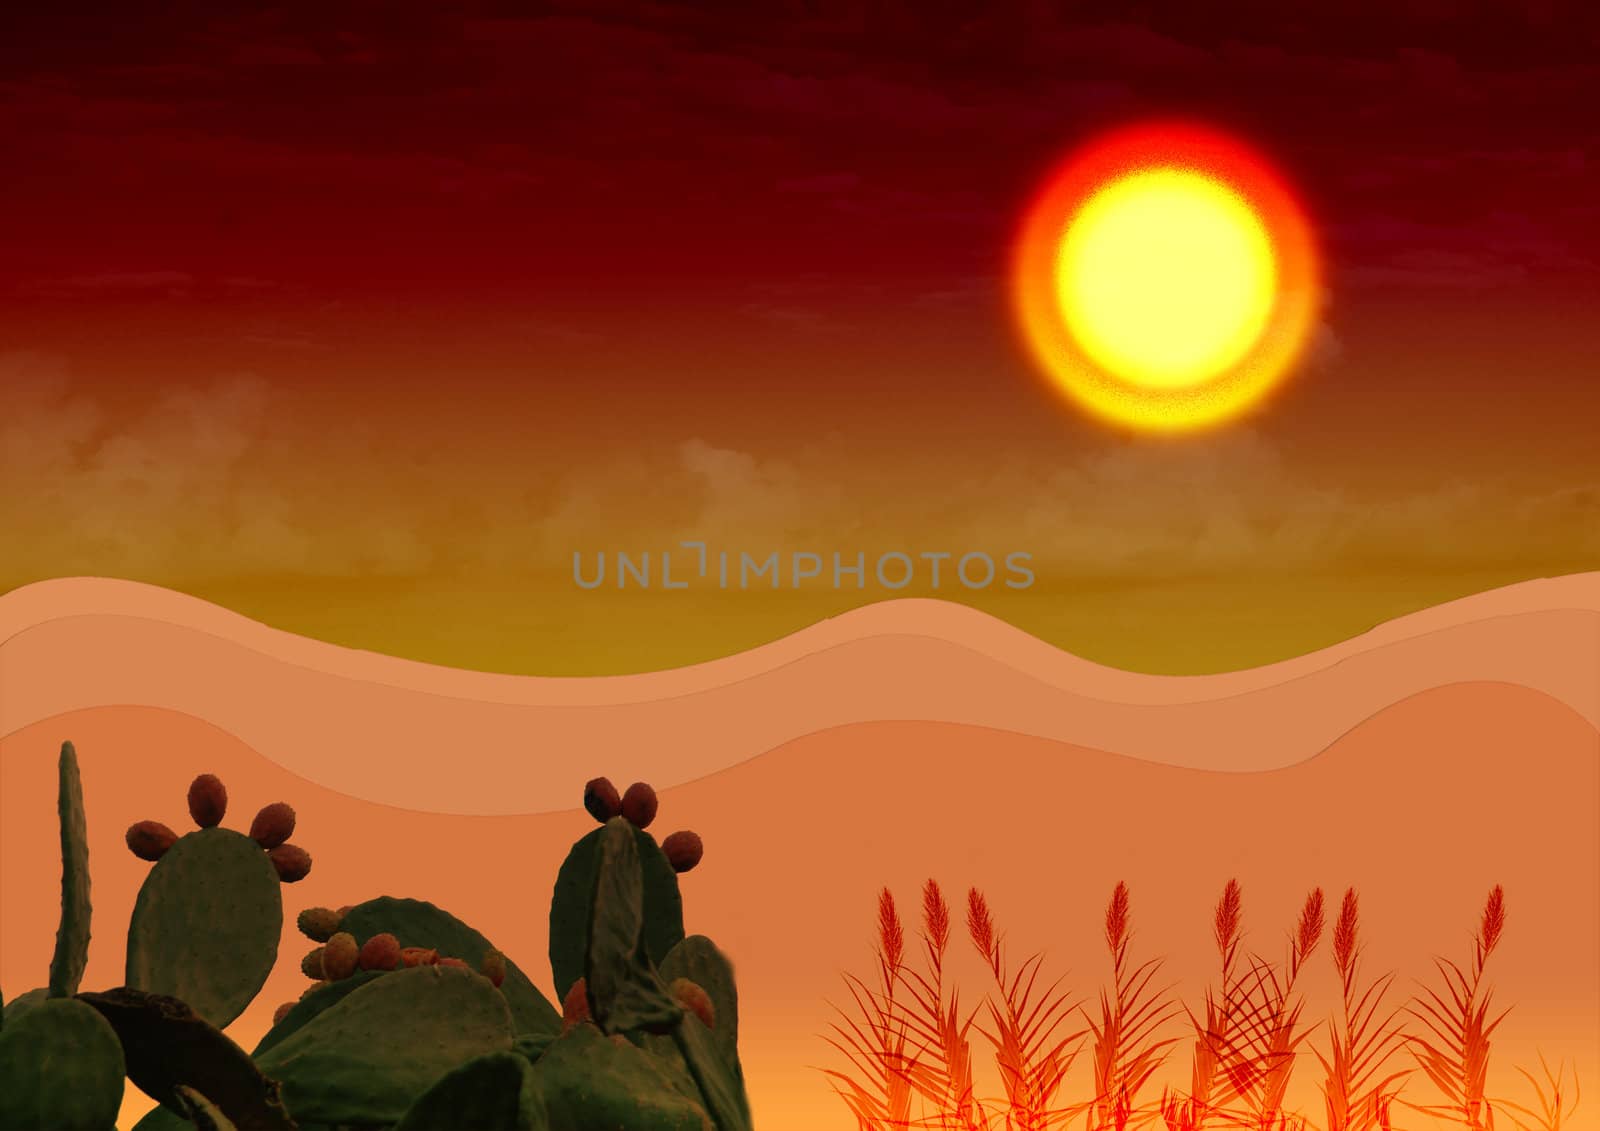 Hot southern landscape under the red sun